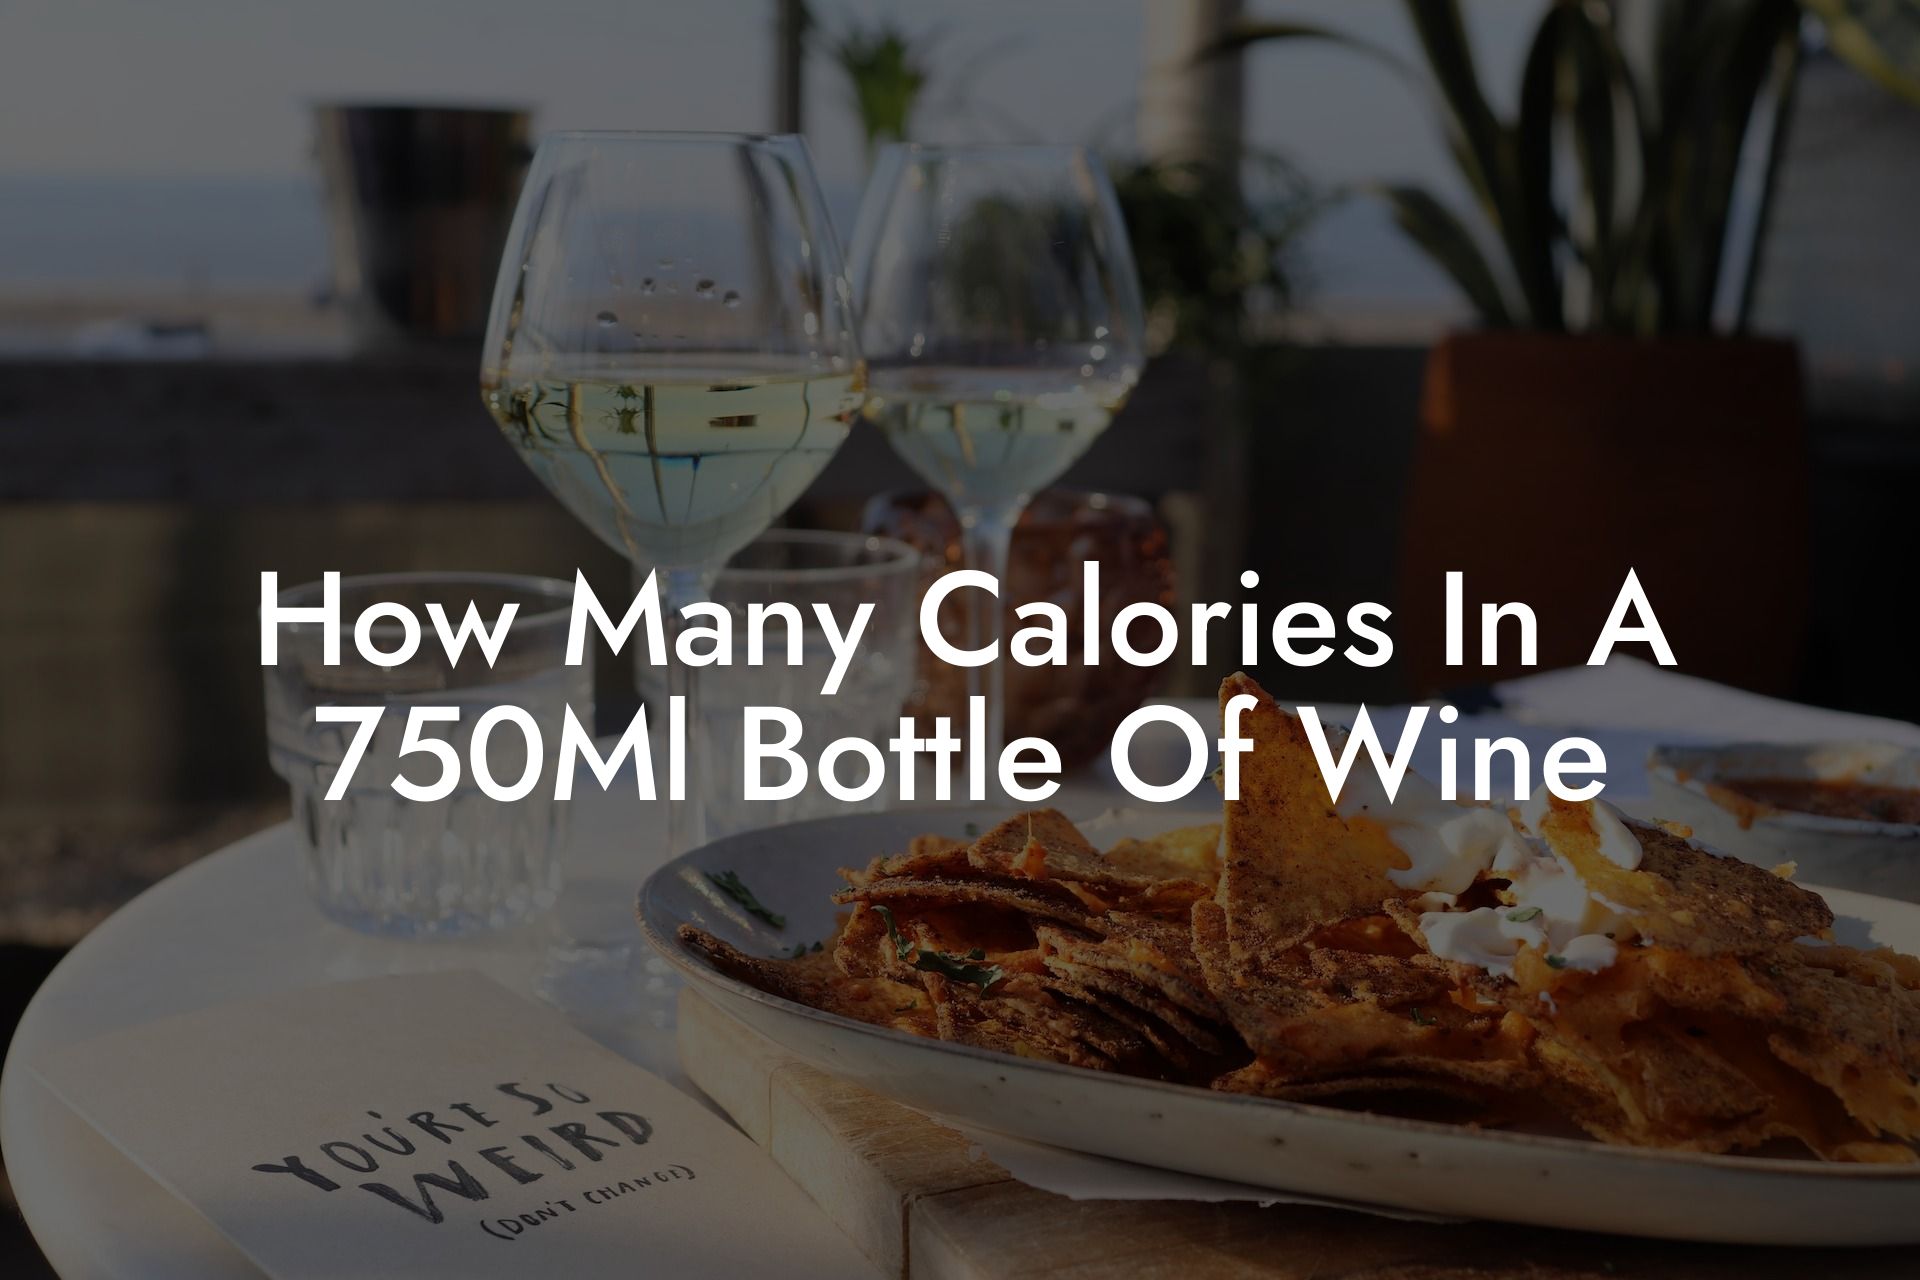 How Many Calories In A 750Ml Bottle Of Wine